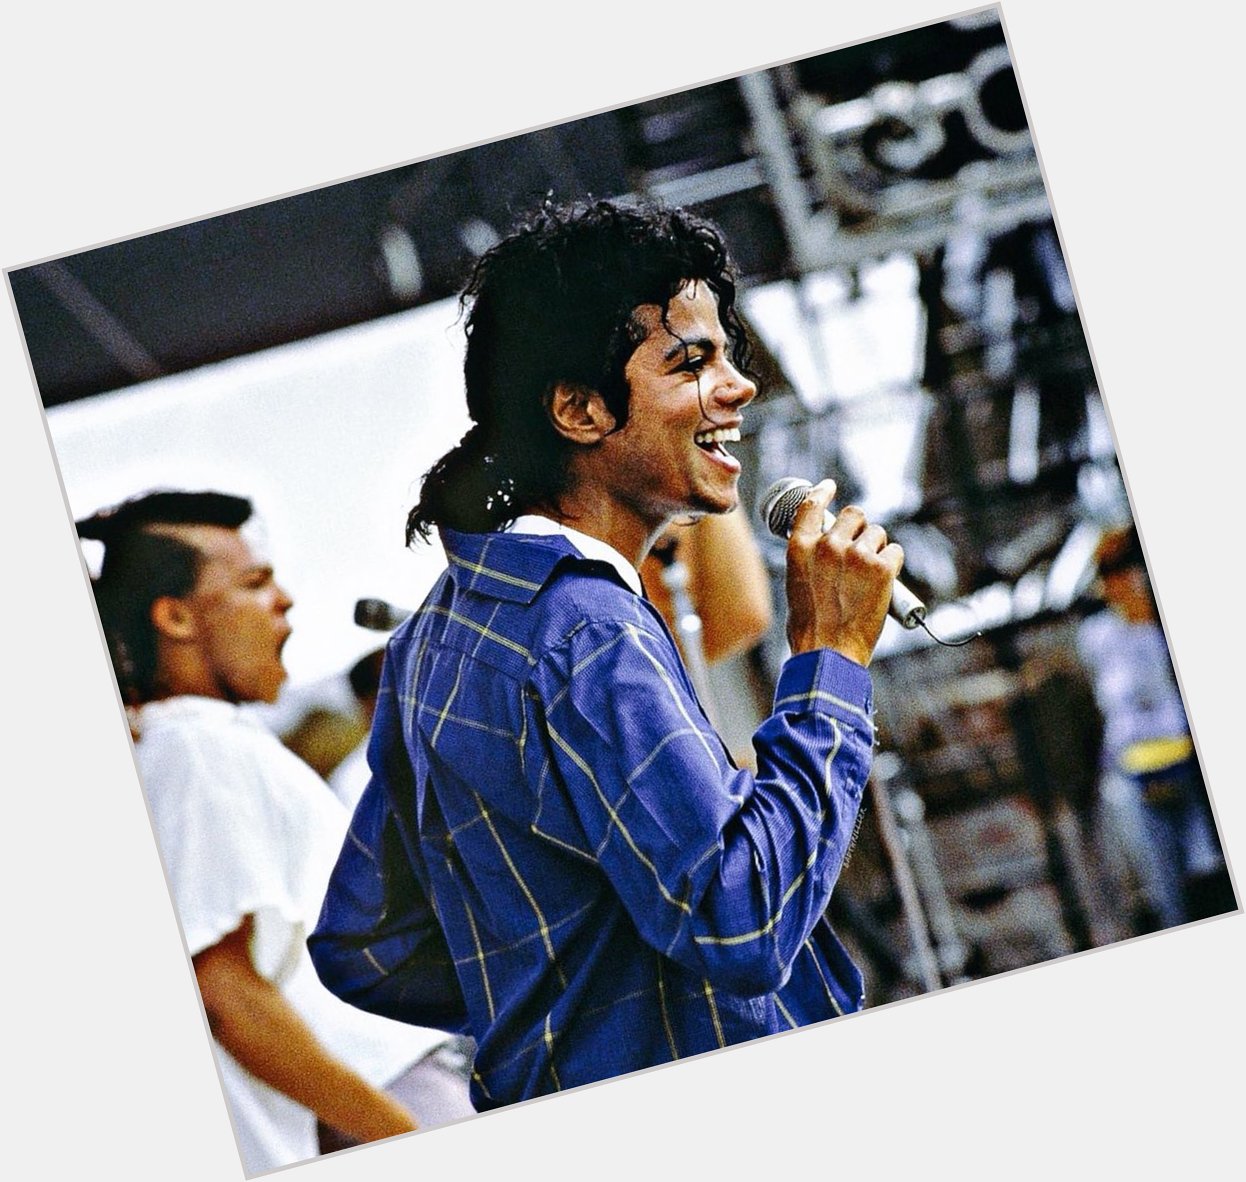 Happy Birthday, Michael Jackson, you will always be in my heart.    